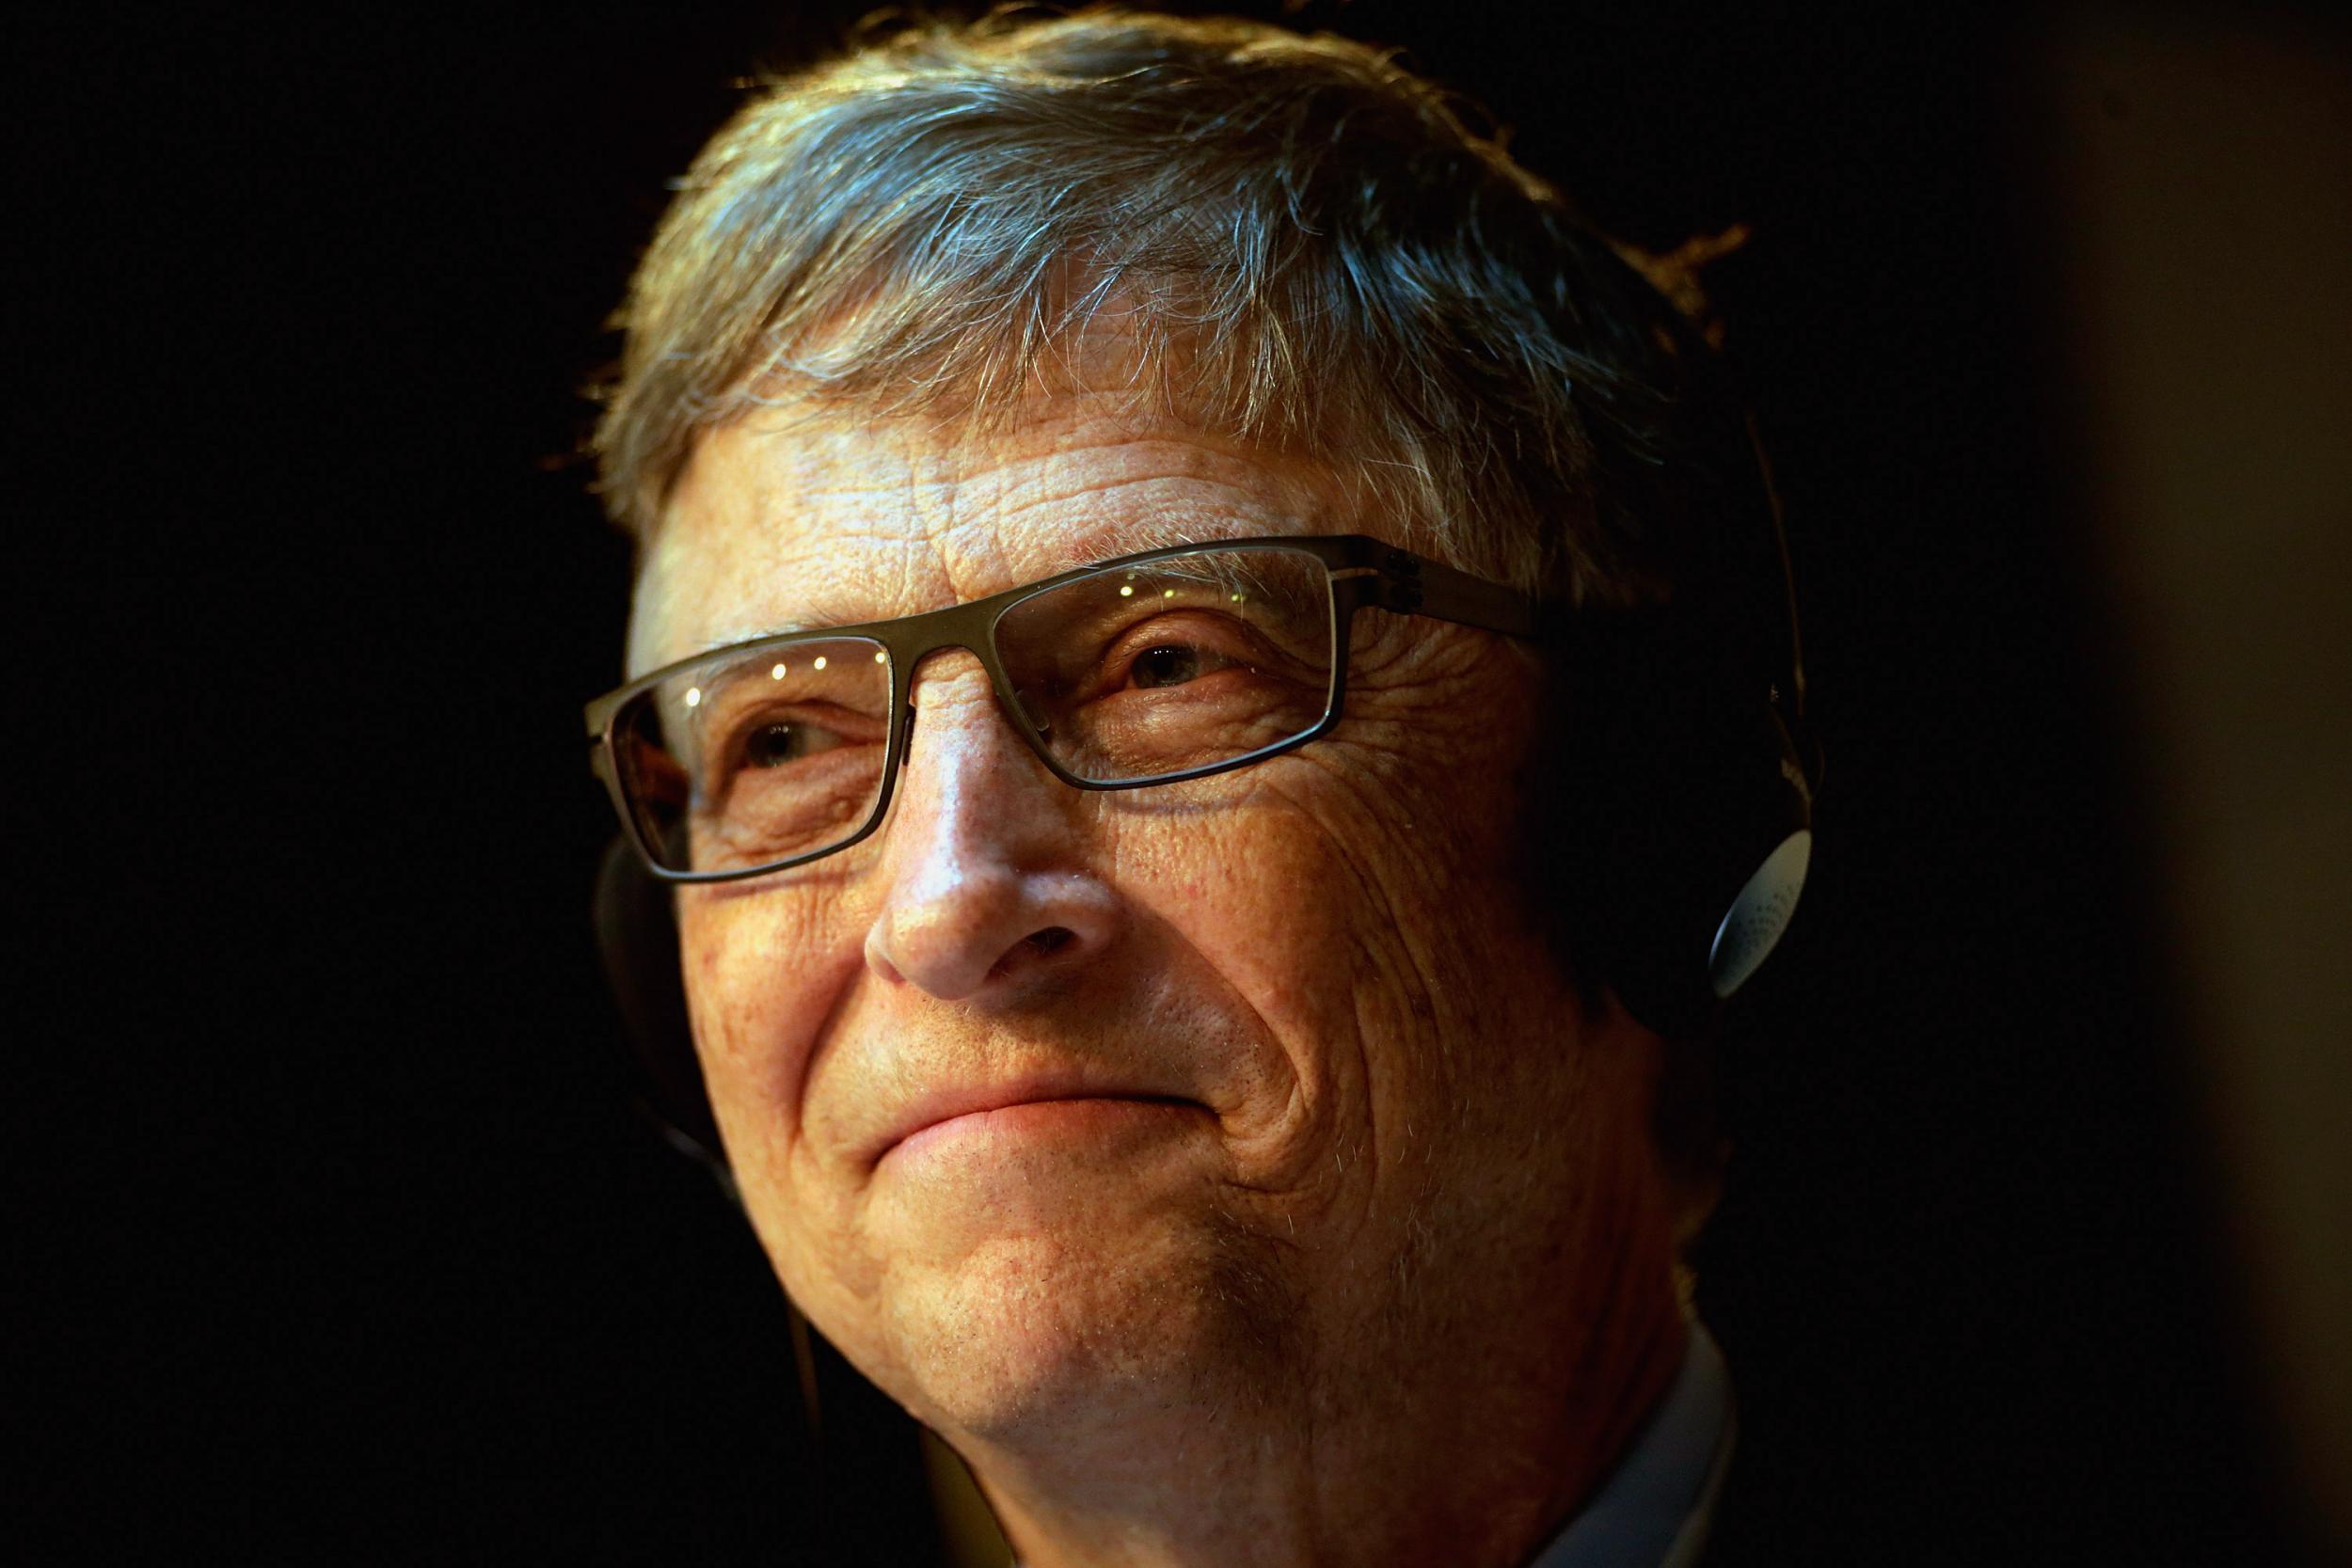 Bill Gates said dementia research is at a ‘turning point’